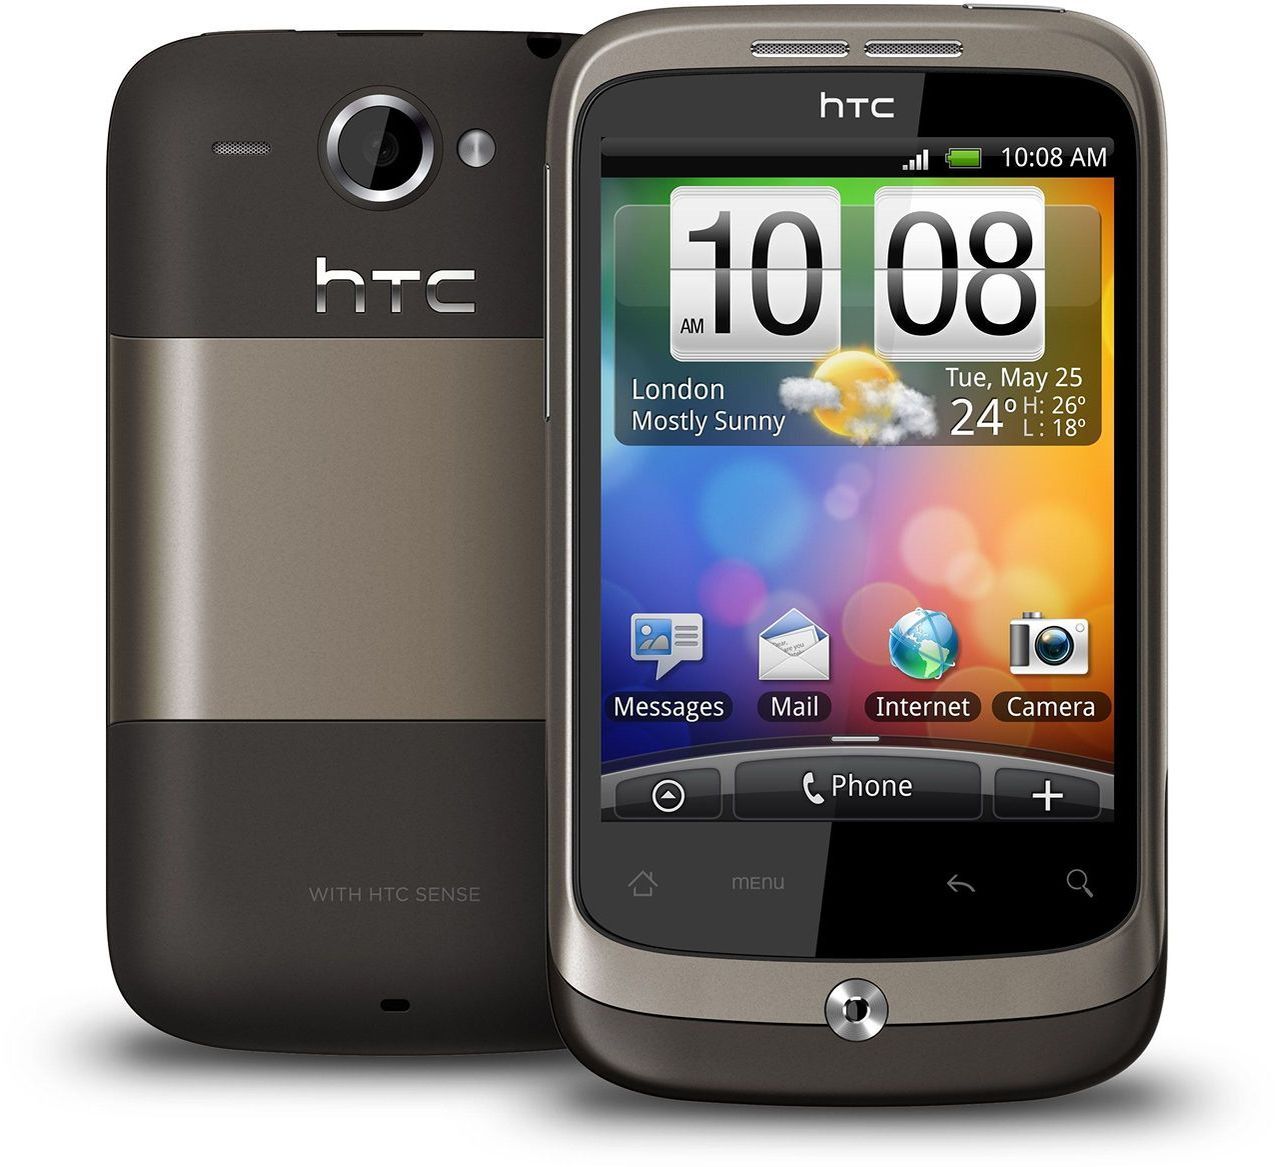 CARA: Instal CM9 Android 4.0 ICS di HTC Wildfire S